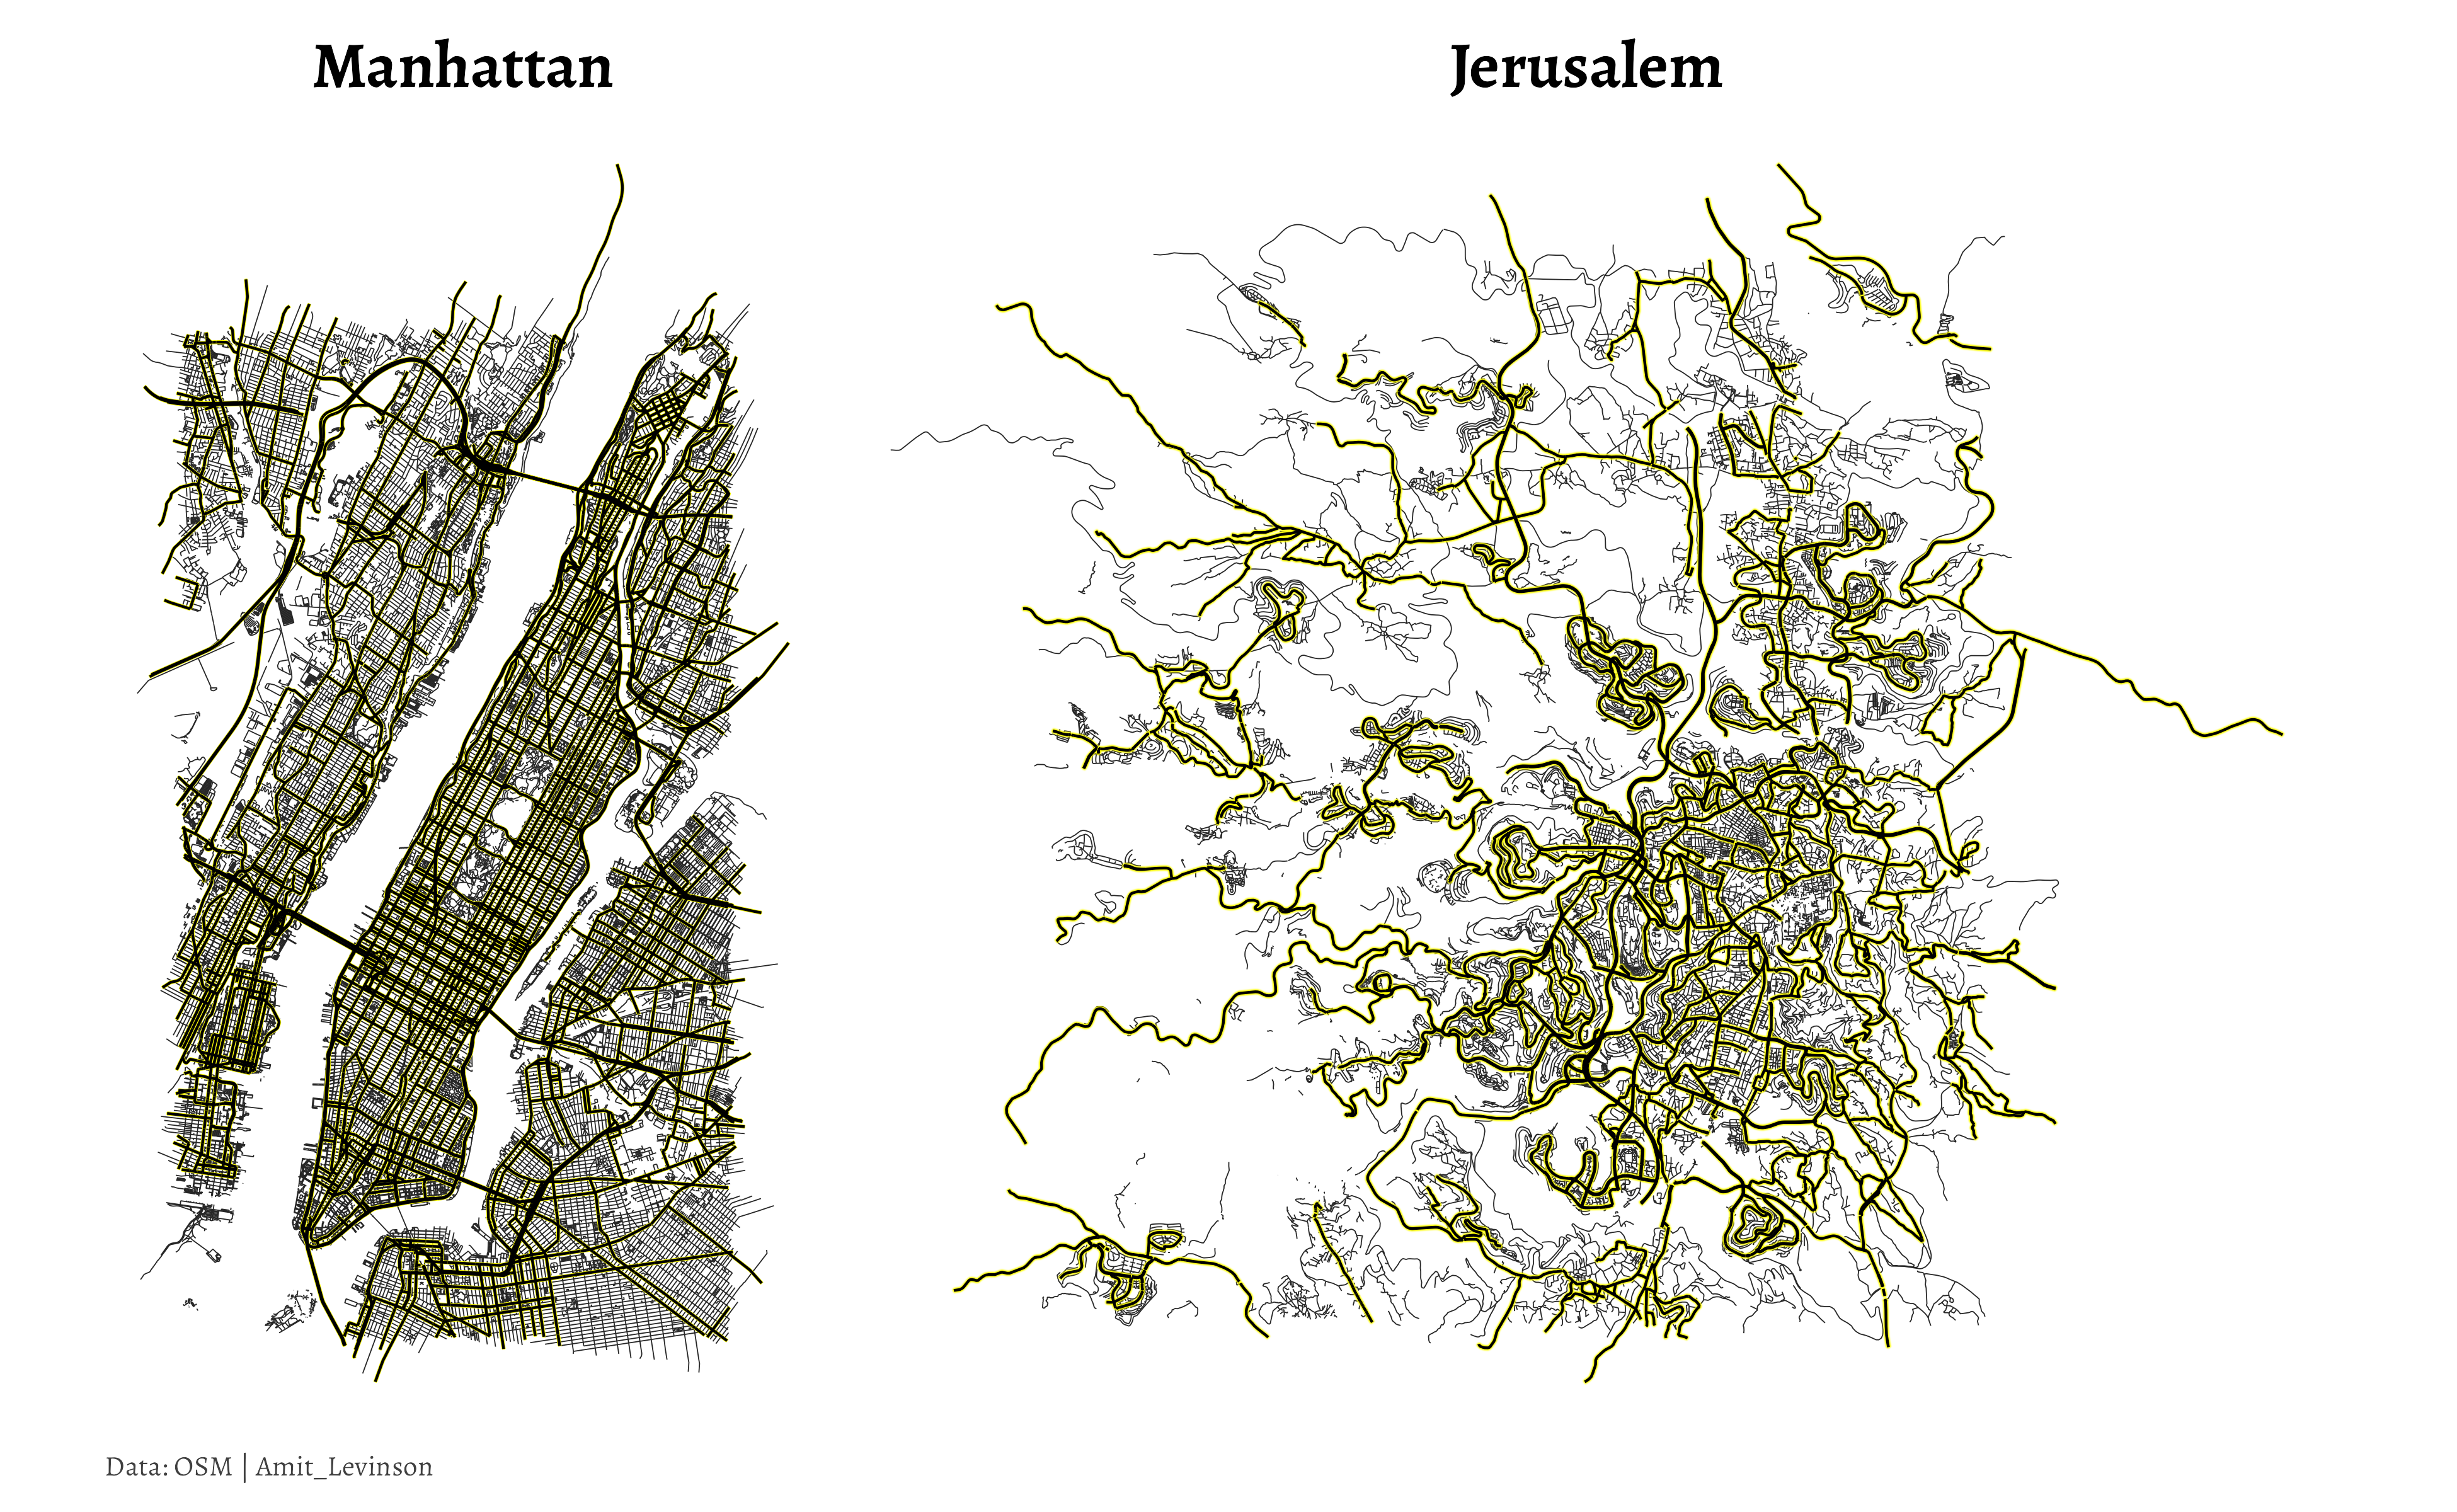 Two street maps of New-York and Jerusalem